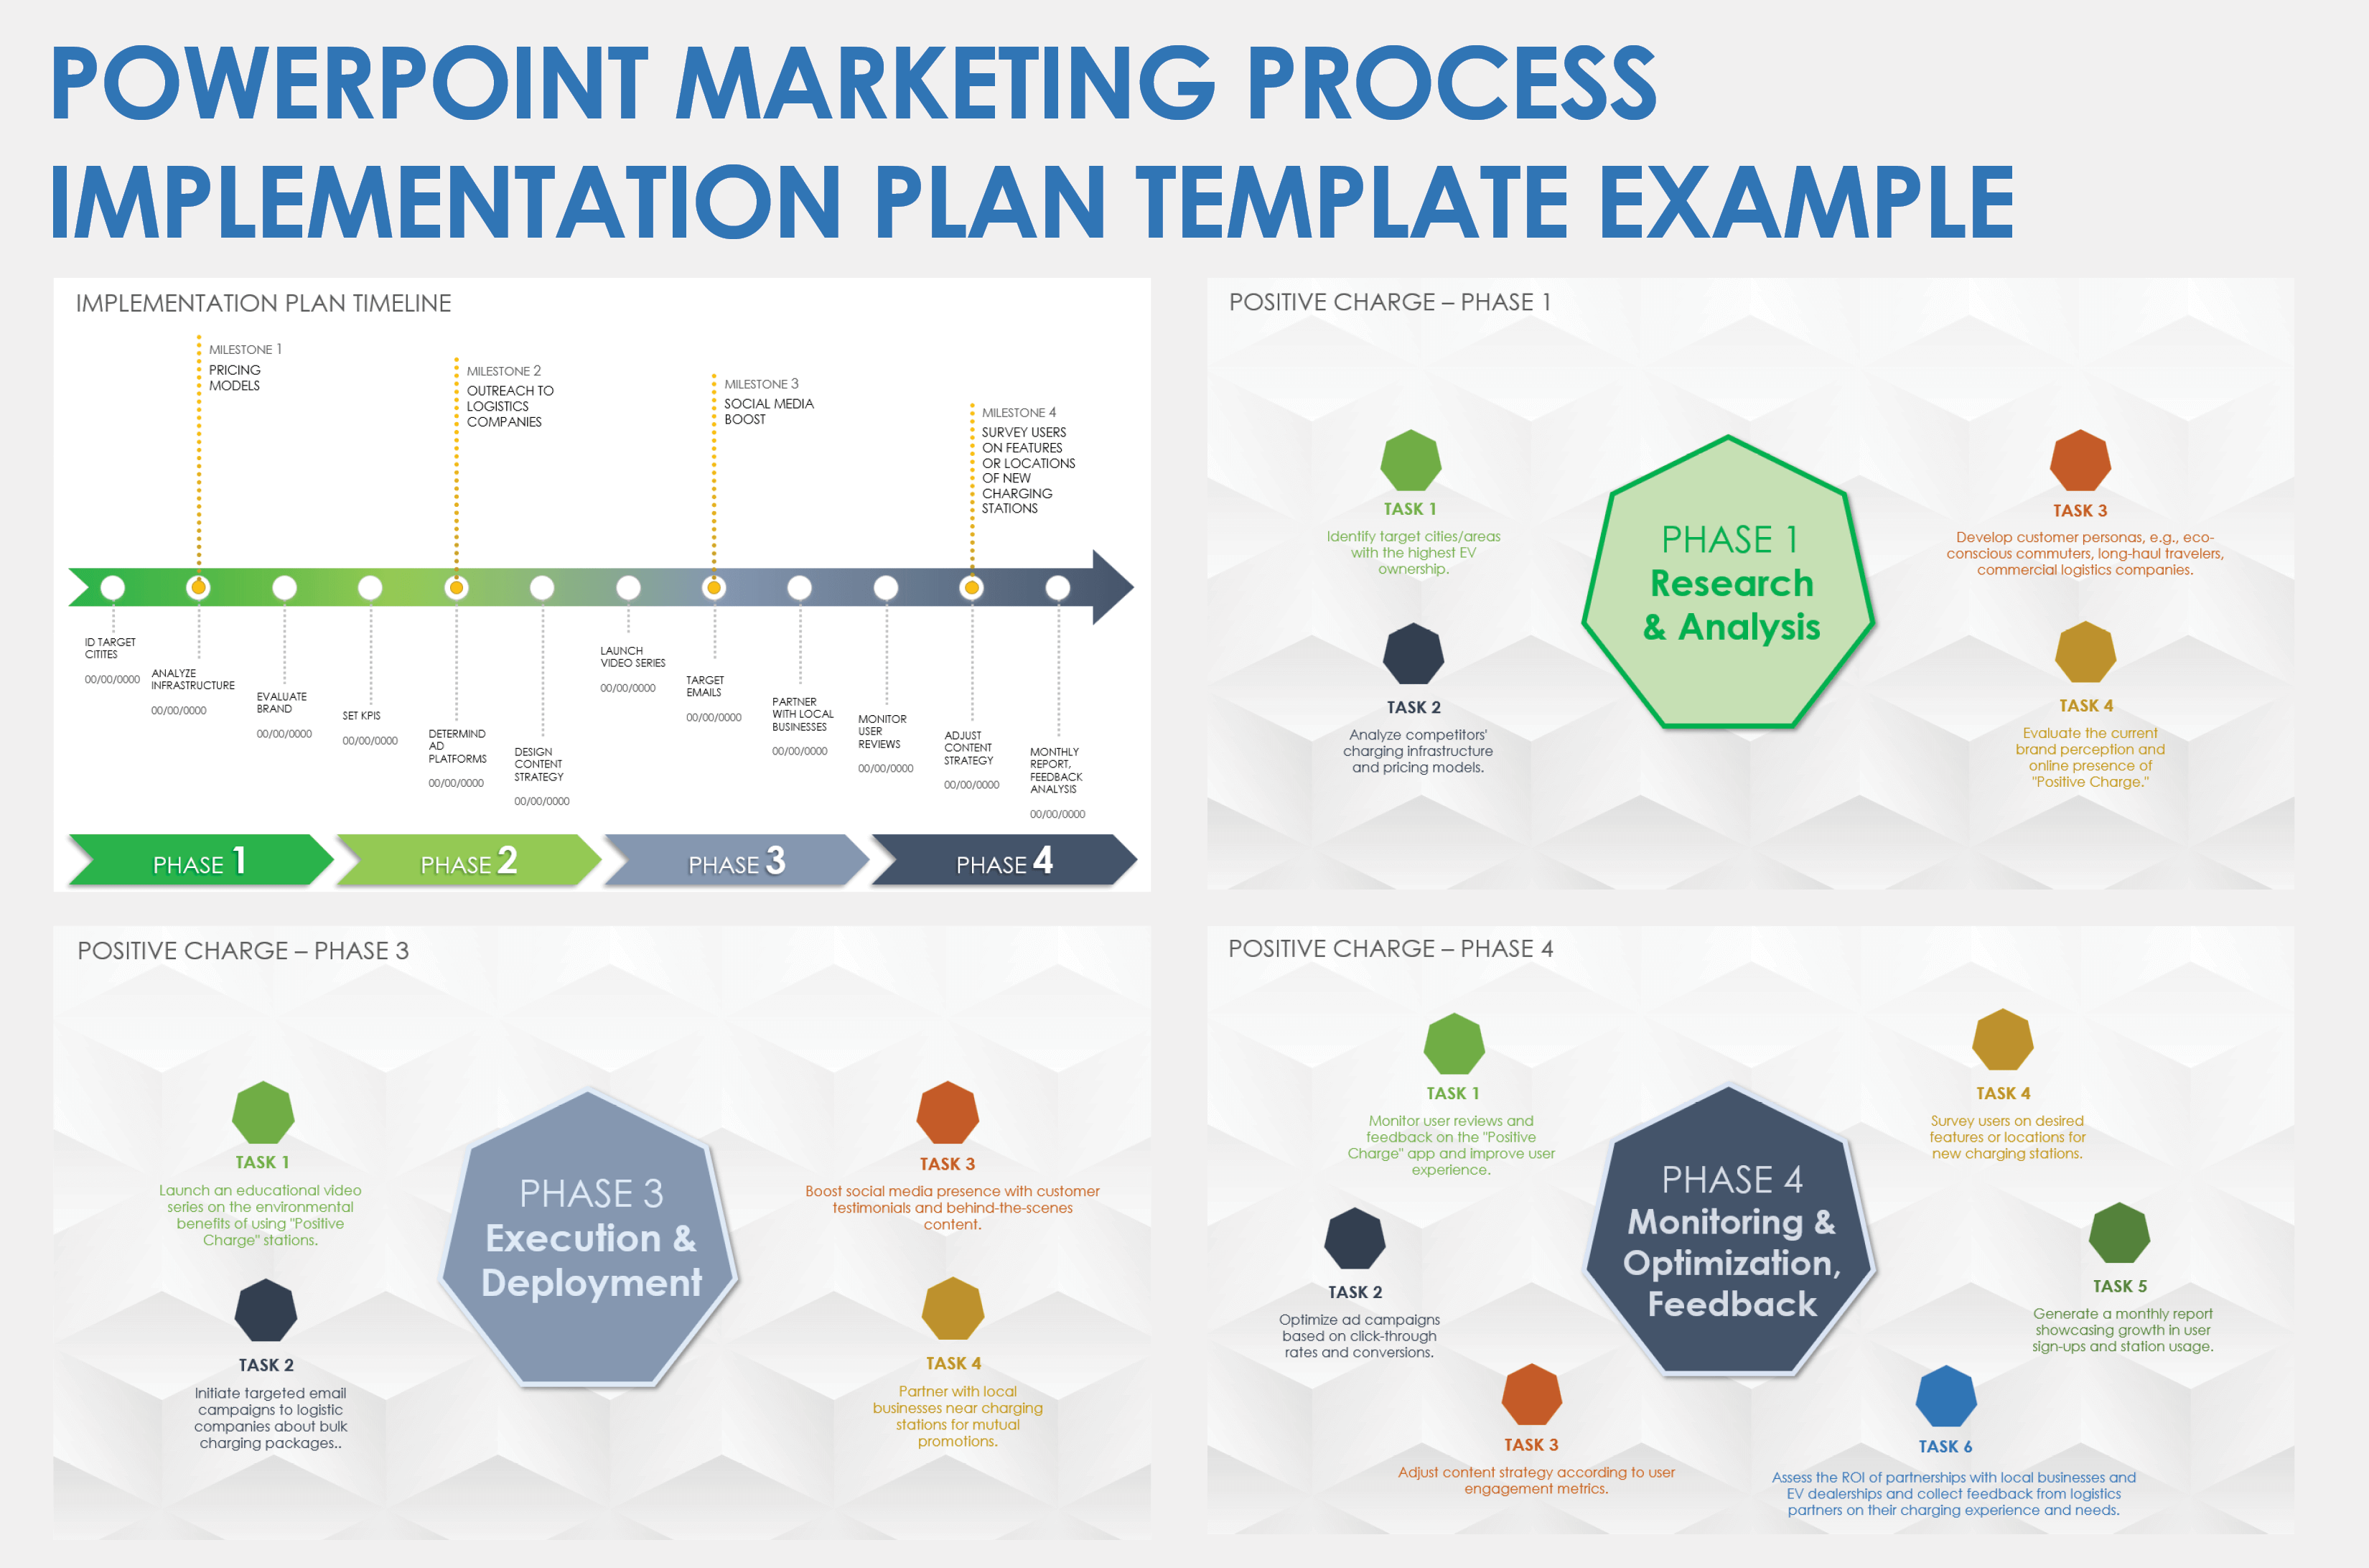 PowerPoint Marketing Process Implementation Plan Example Template